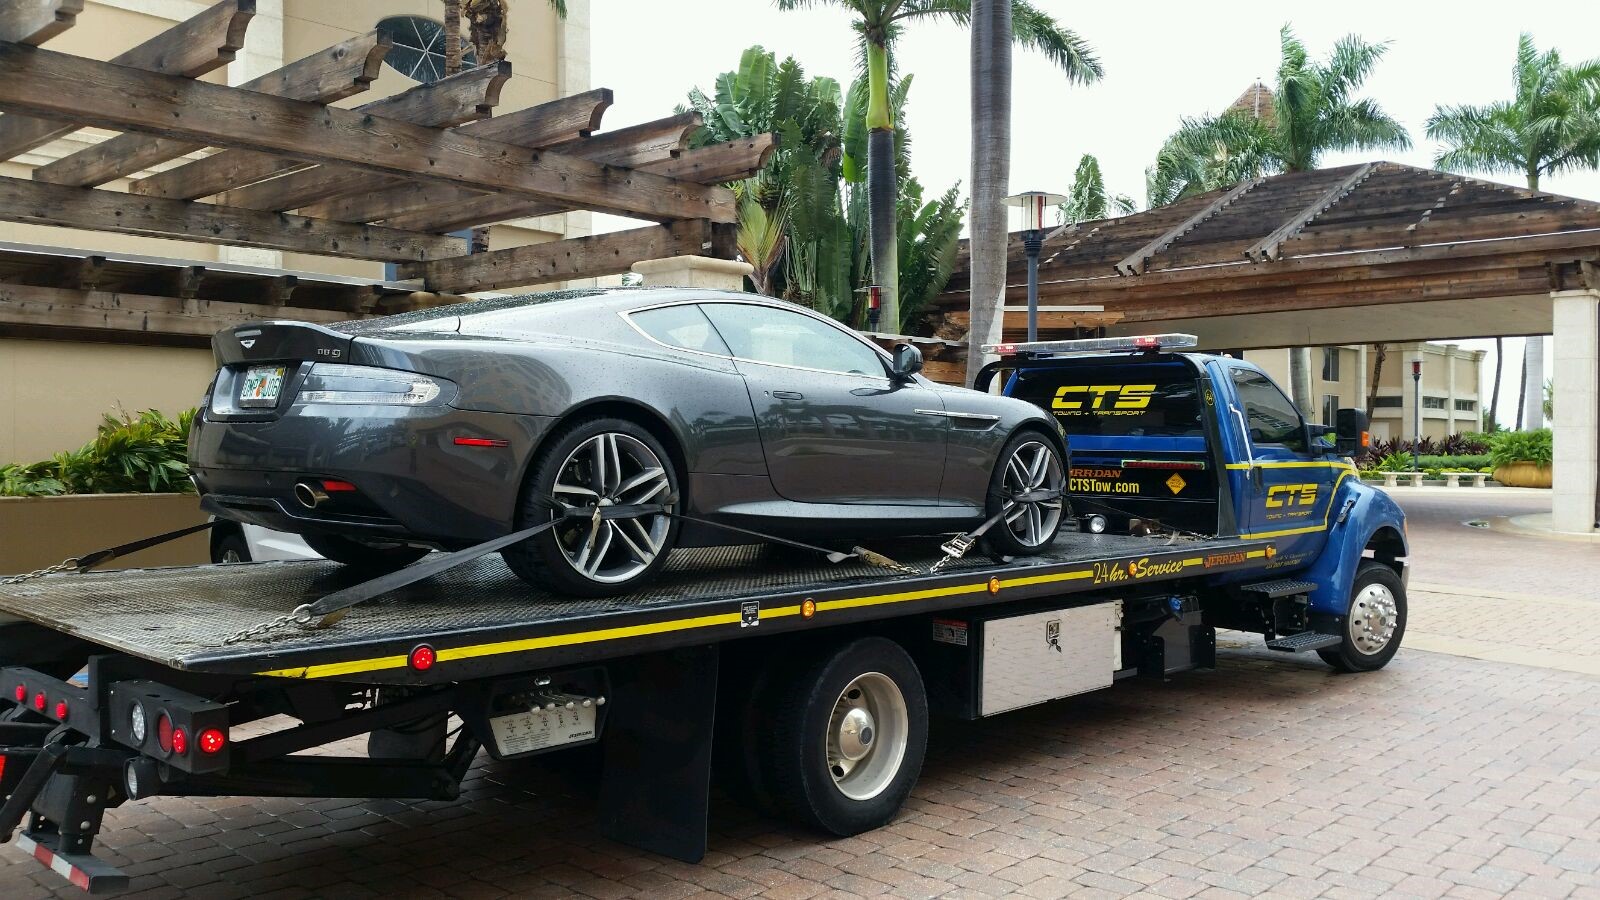 Aston Martin on a rollback CTS Tow Truck